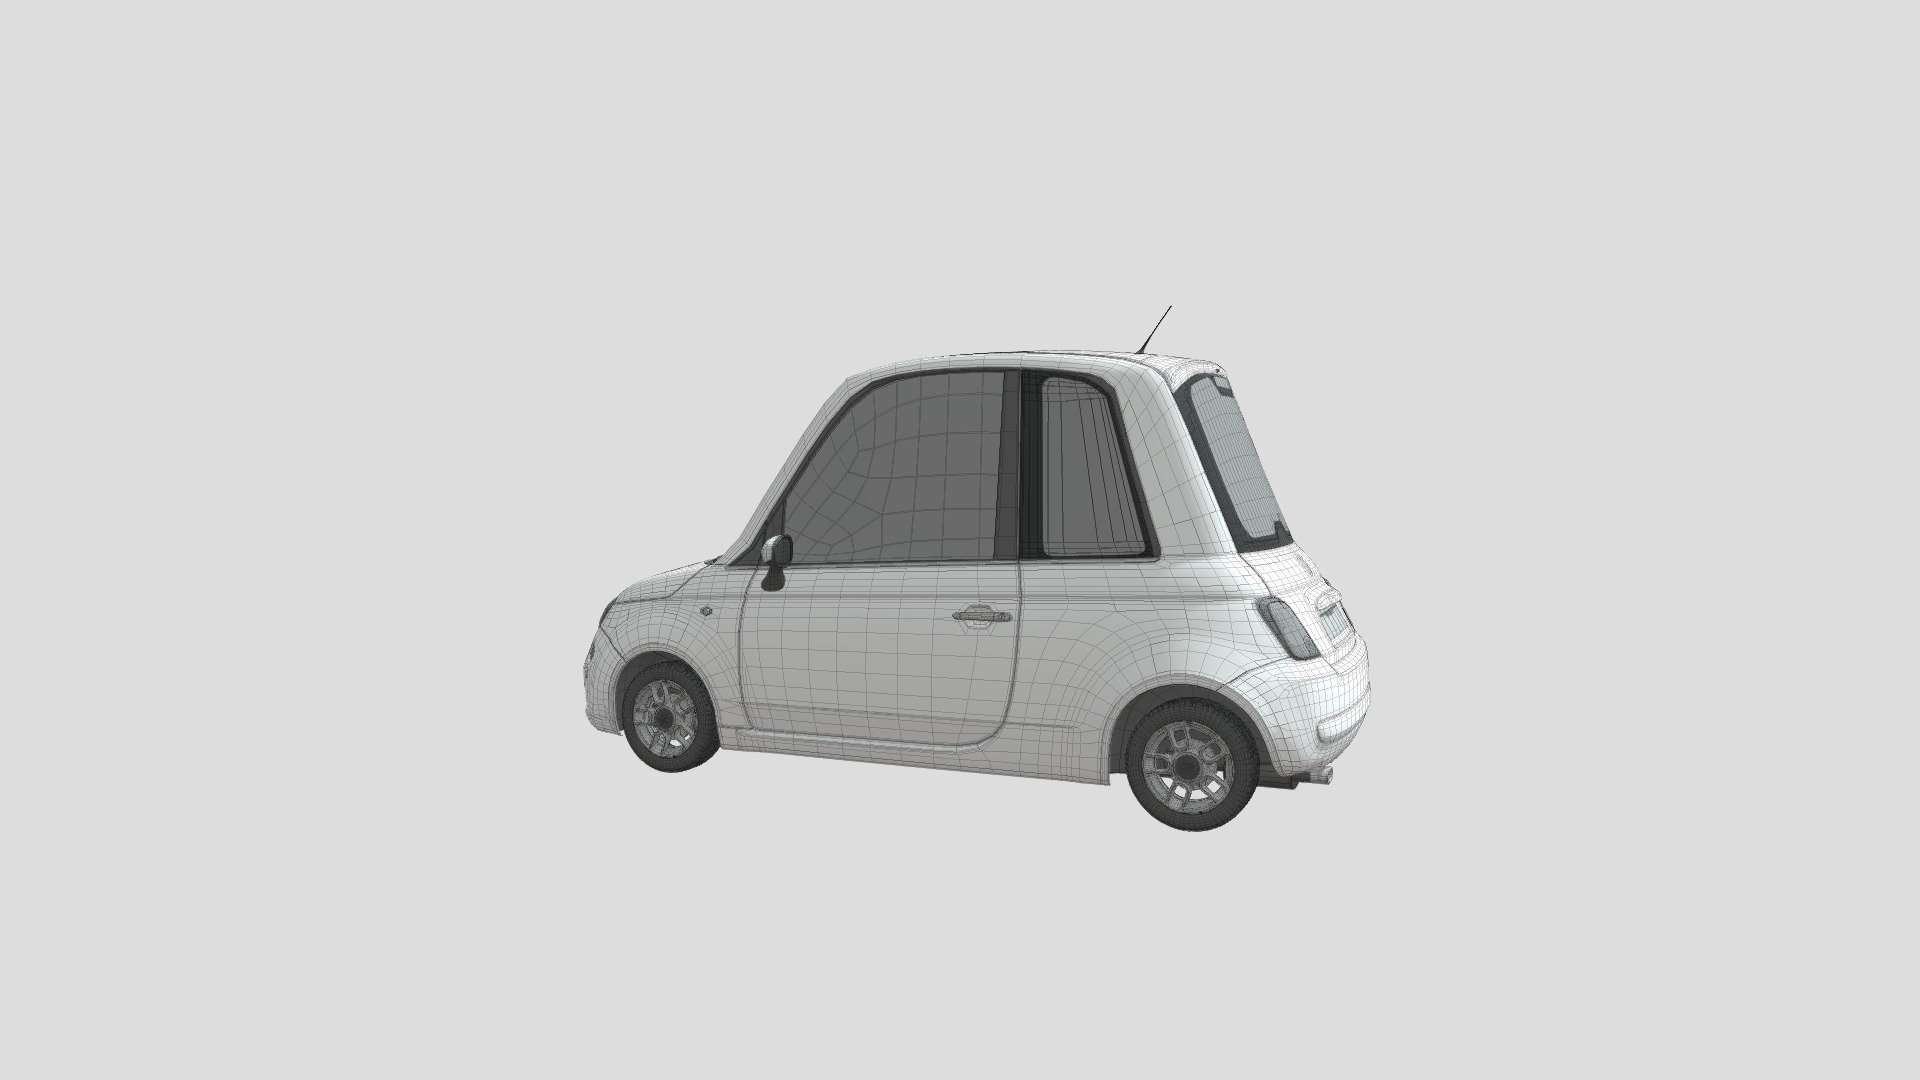 Fiat 500 cartoon model
City car modeling, it was made from base fiat 500 which i modified into a cute cartoon car 3d model